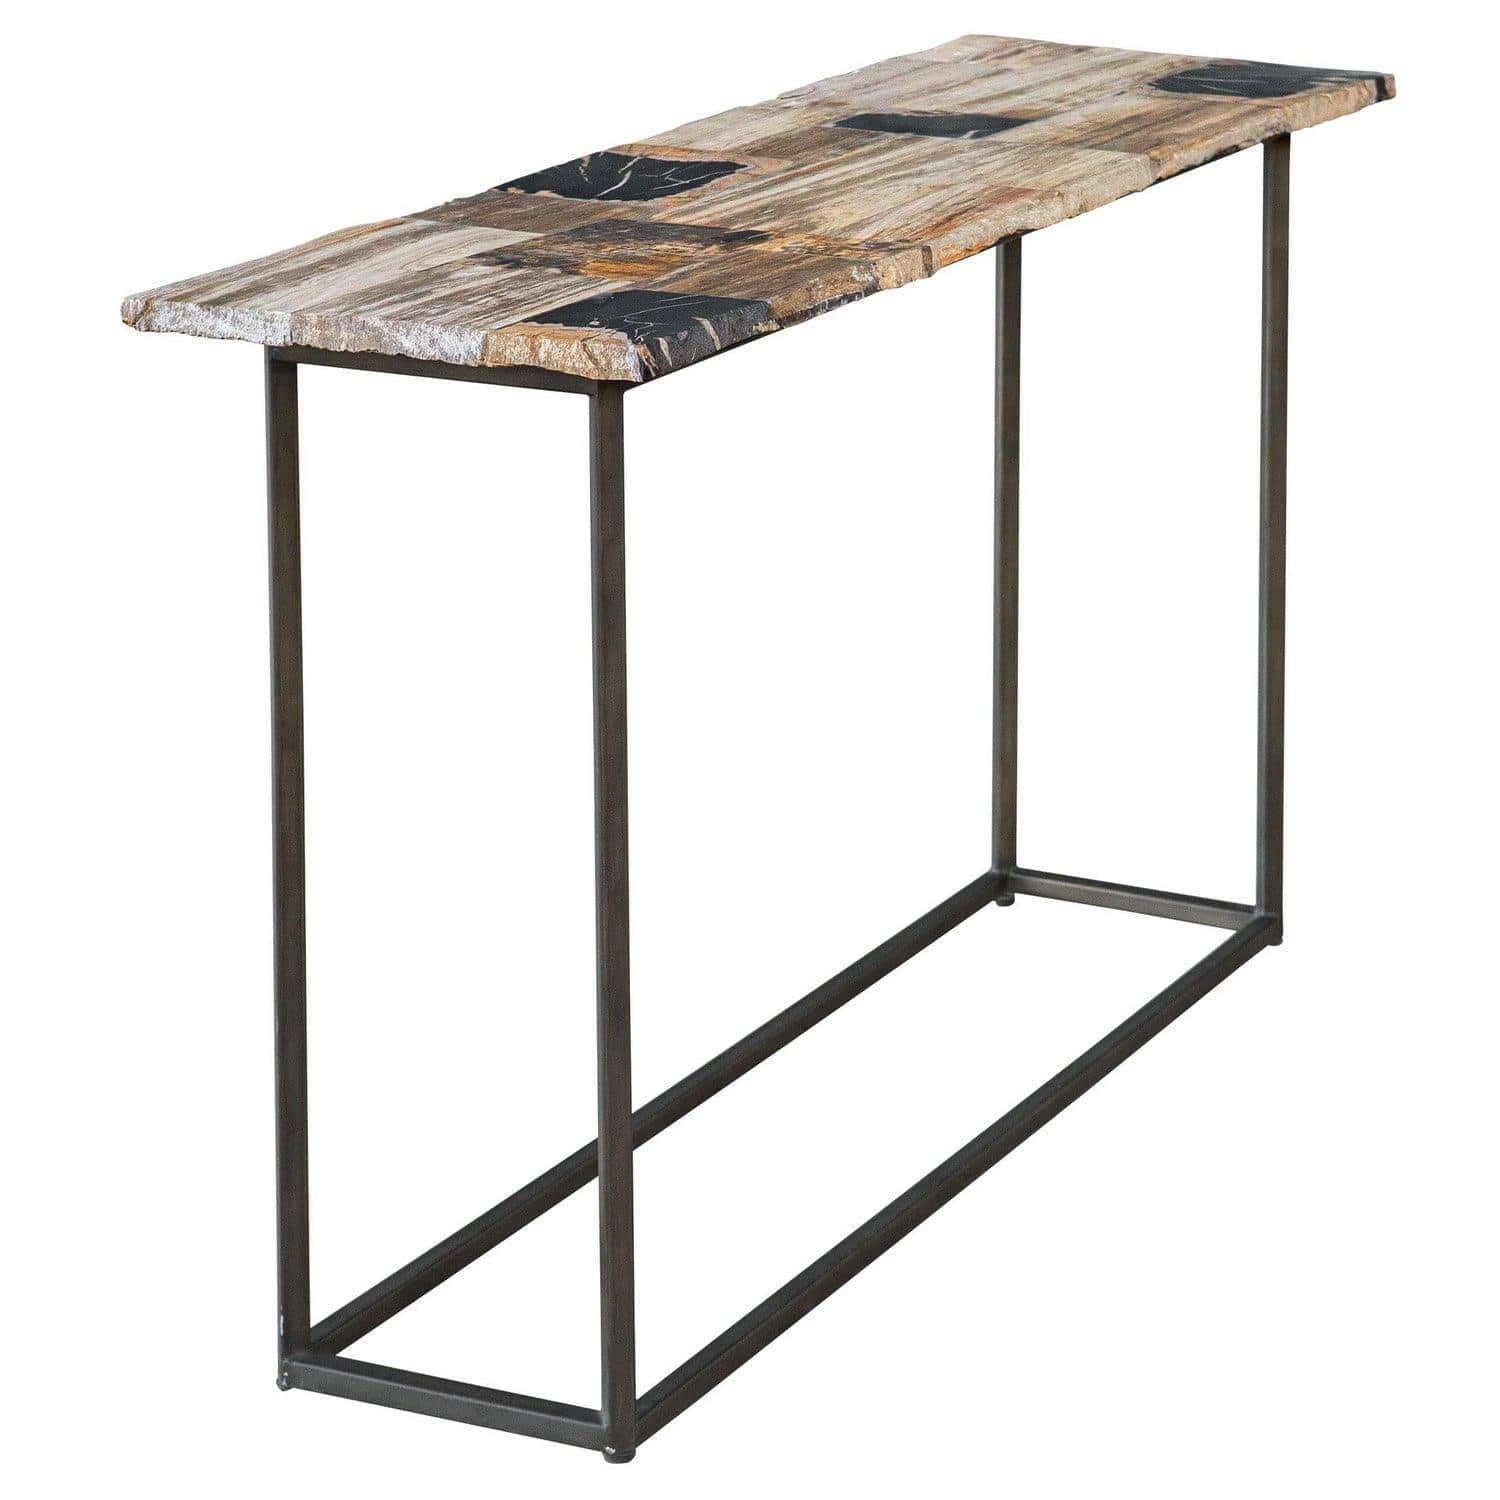 The Uttermost - Iya Console Table - 25498 | Montreal Lighting & Hardware